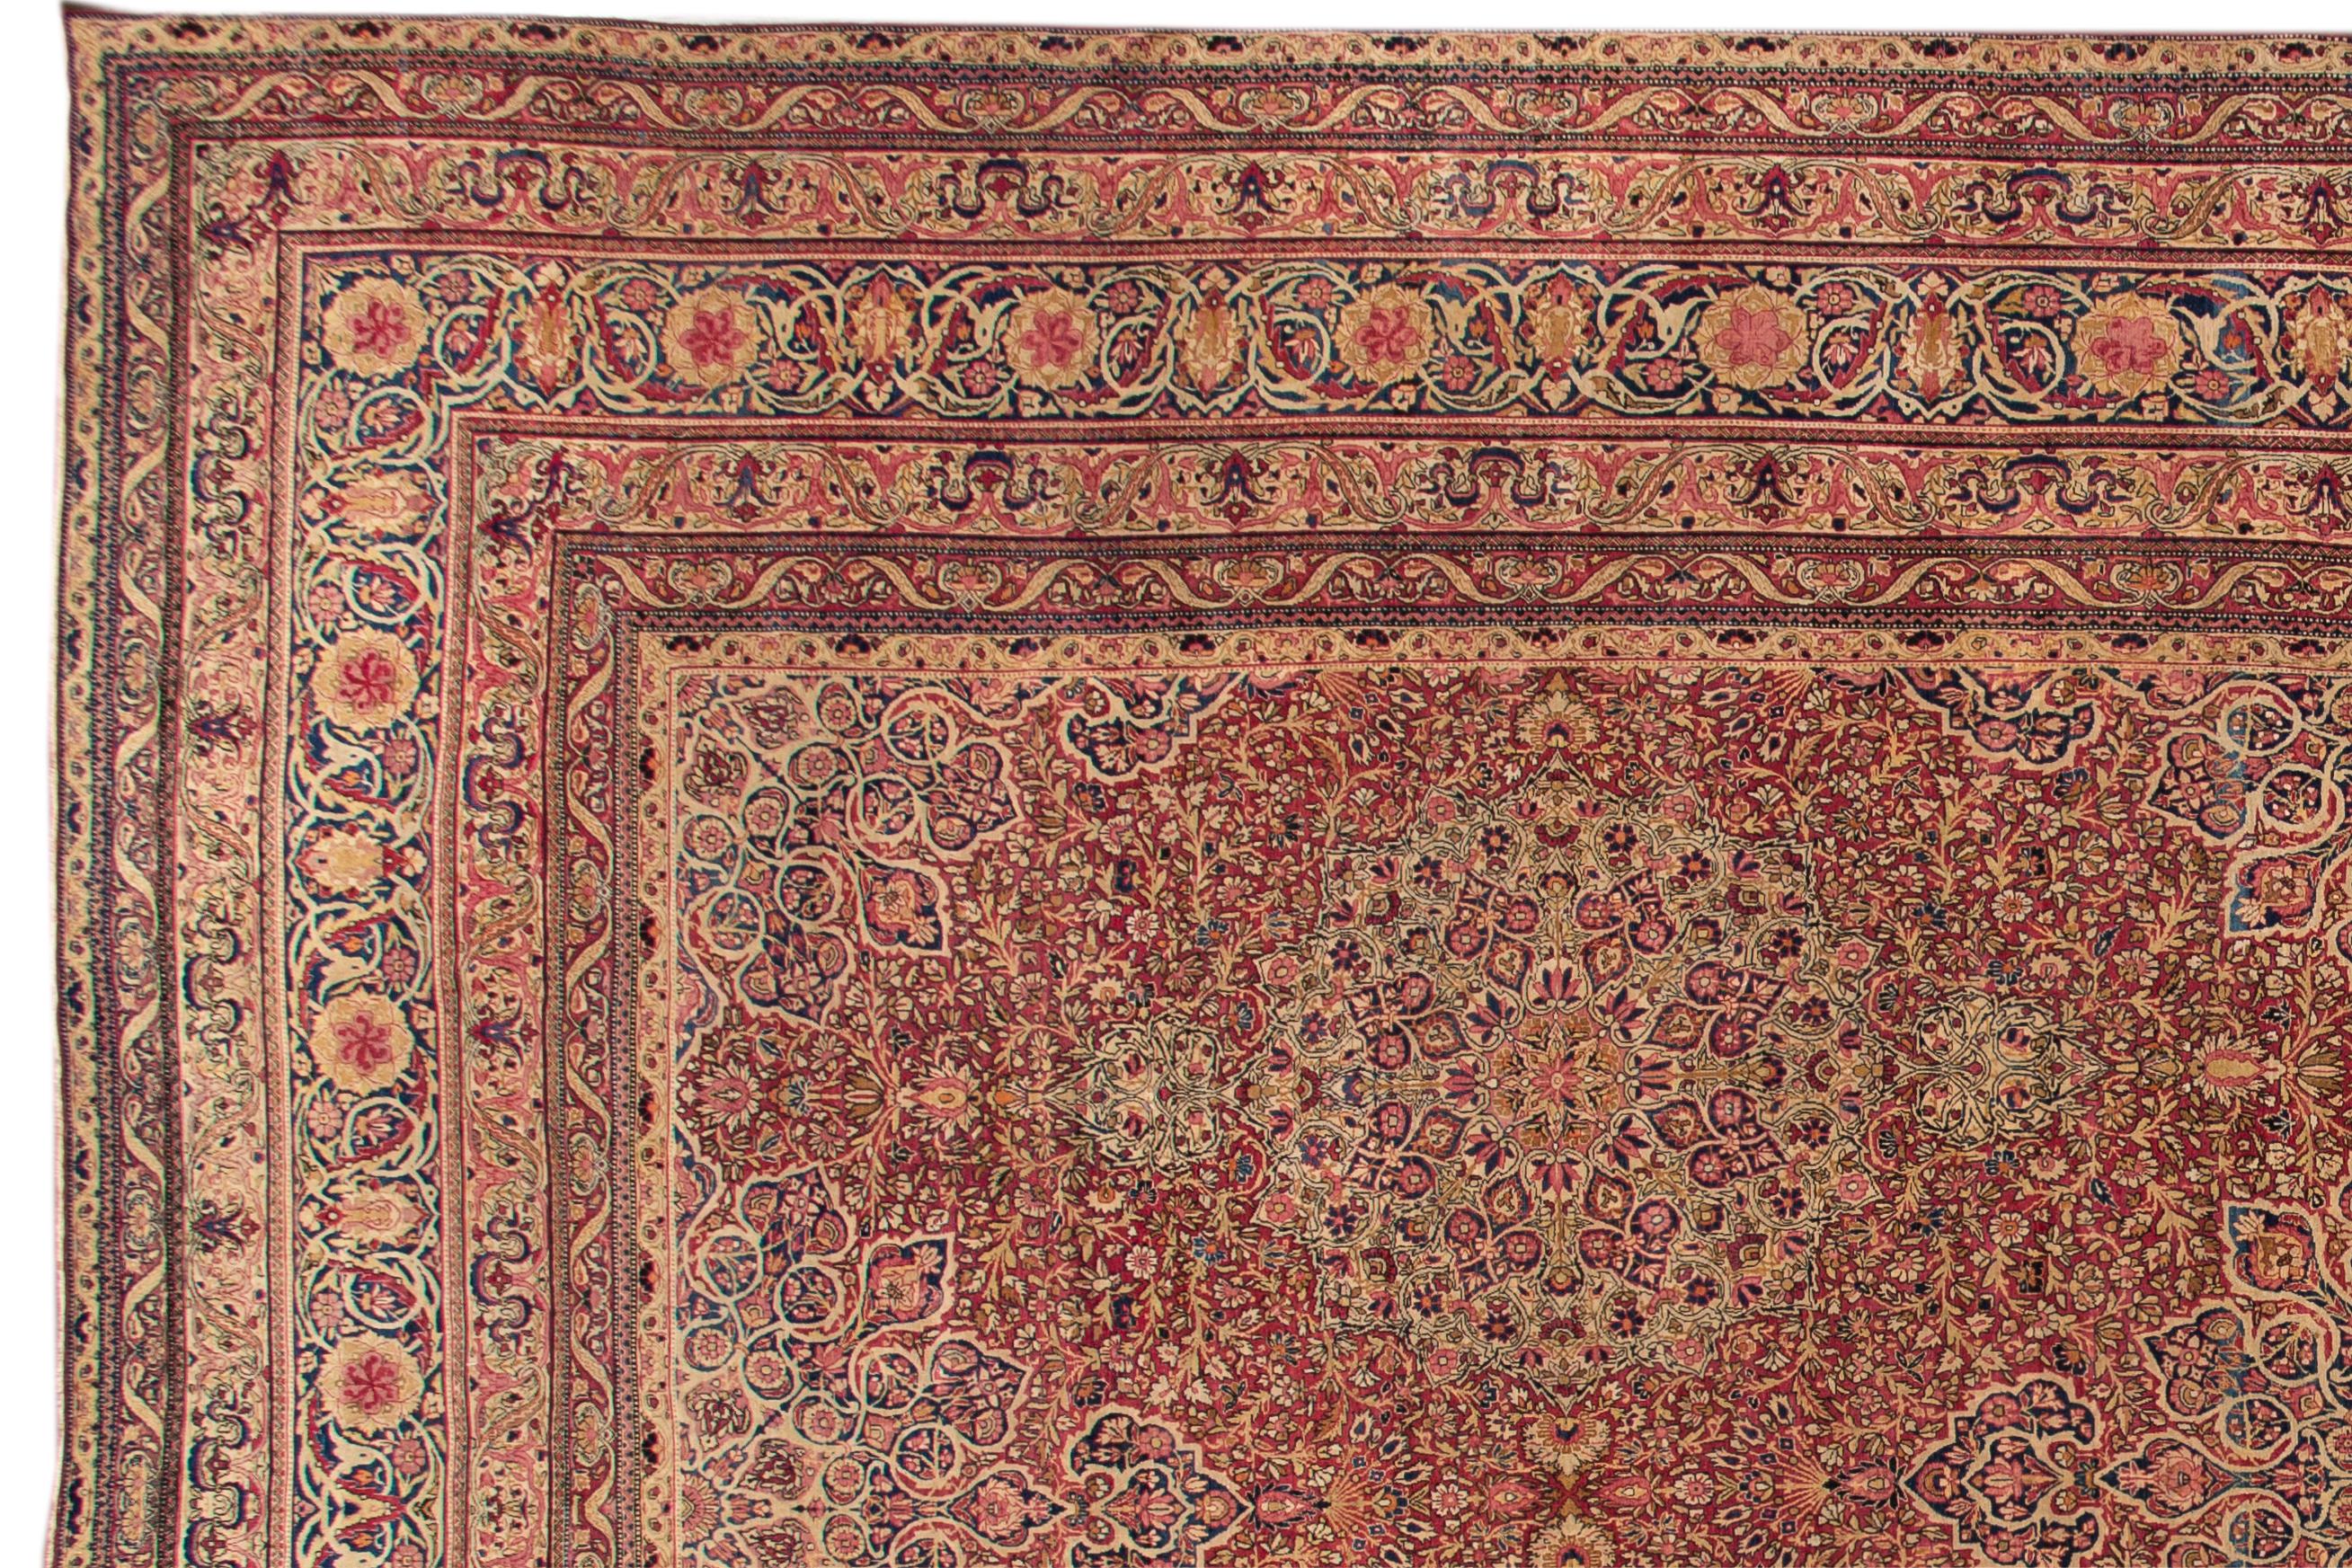 A hand-knotted antique Kerman rug with a floral all-over design. This rug measures 14'0